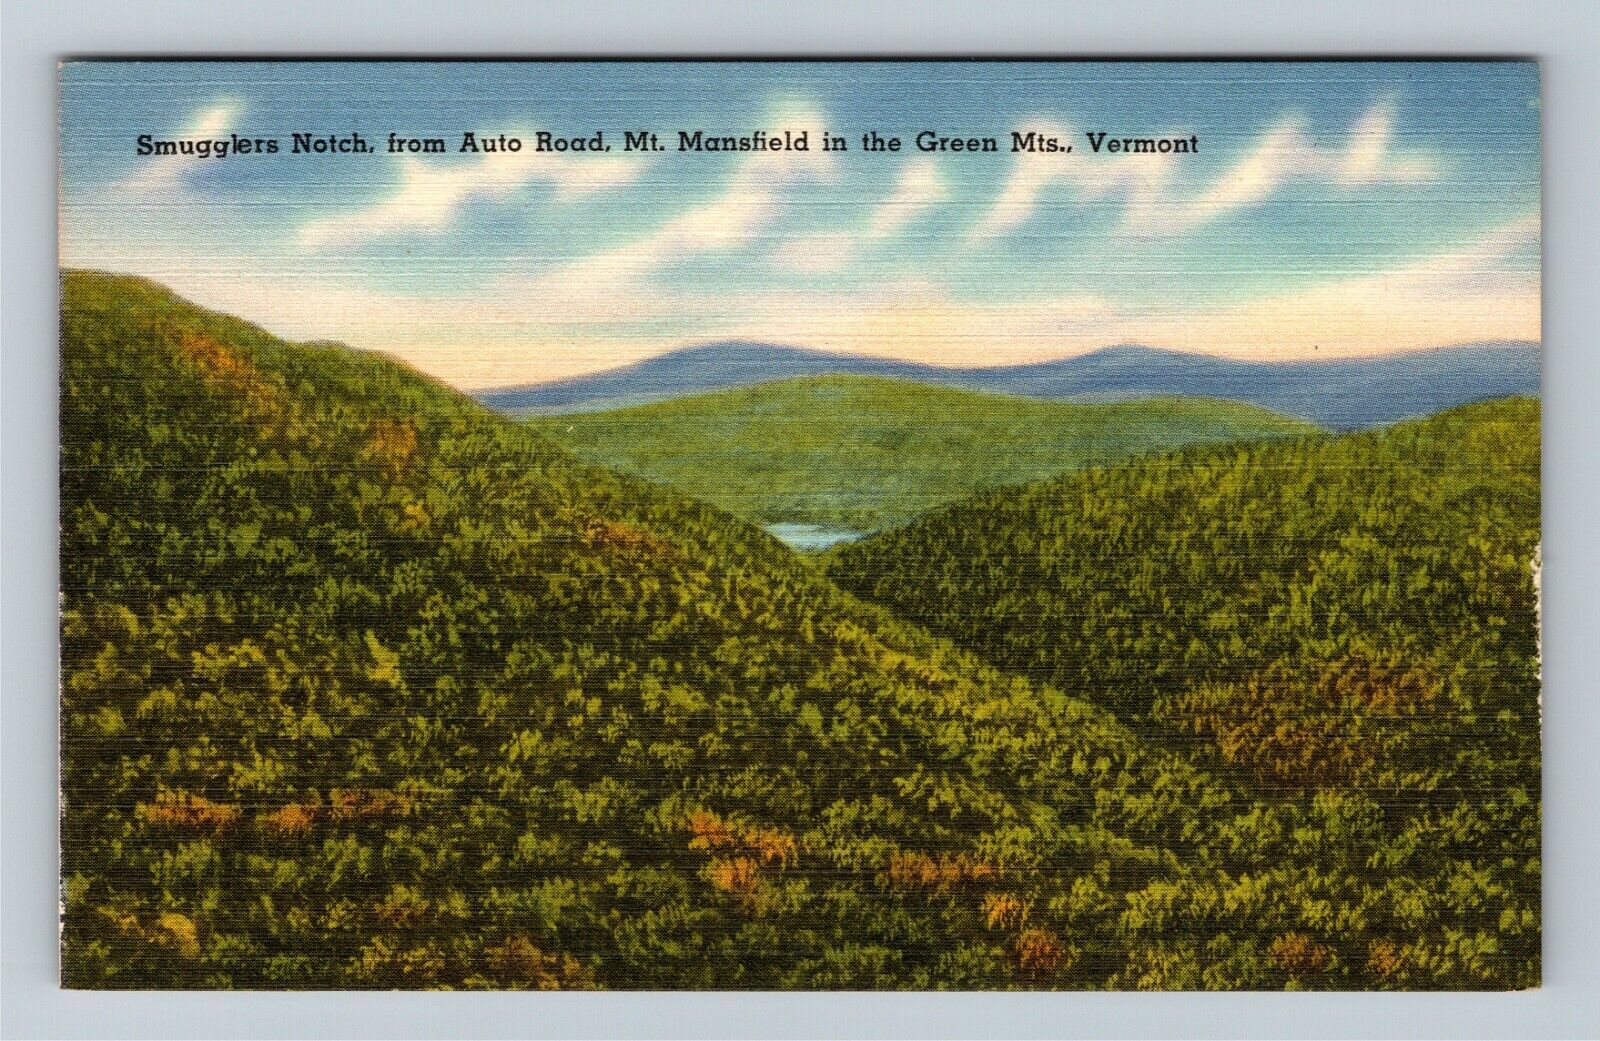 Green Mts. VT-Vermont, Elevated View Smugglers Notch, Vintage Postcard